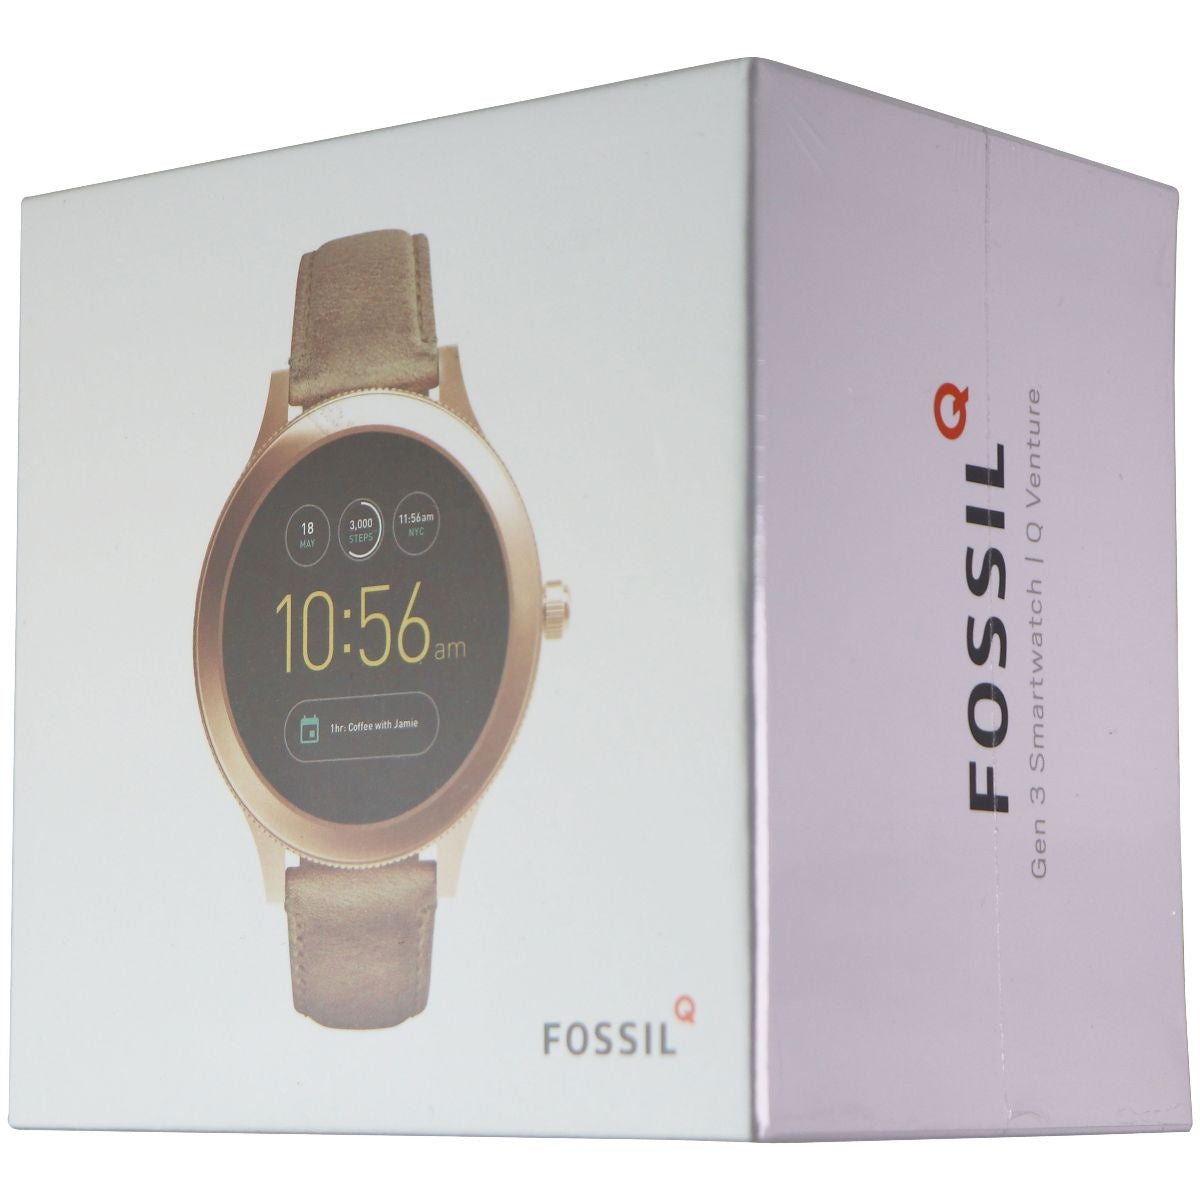 Fossil Womens Gen 3 Venture Stainless Steel Touchscreen Watch - Beige (FTW6005) Smart Watches Fossil    - Simple Cell Bulk Wholesale Pricing - USA Seller